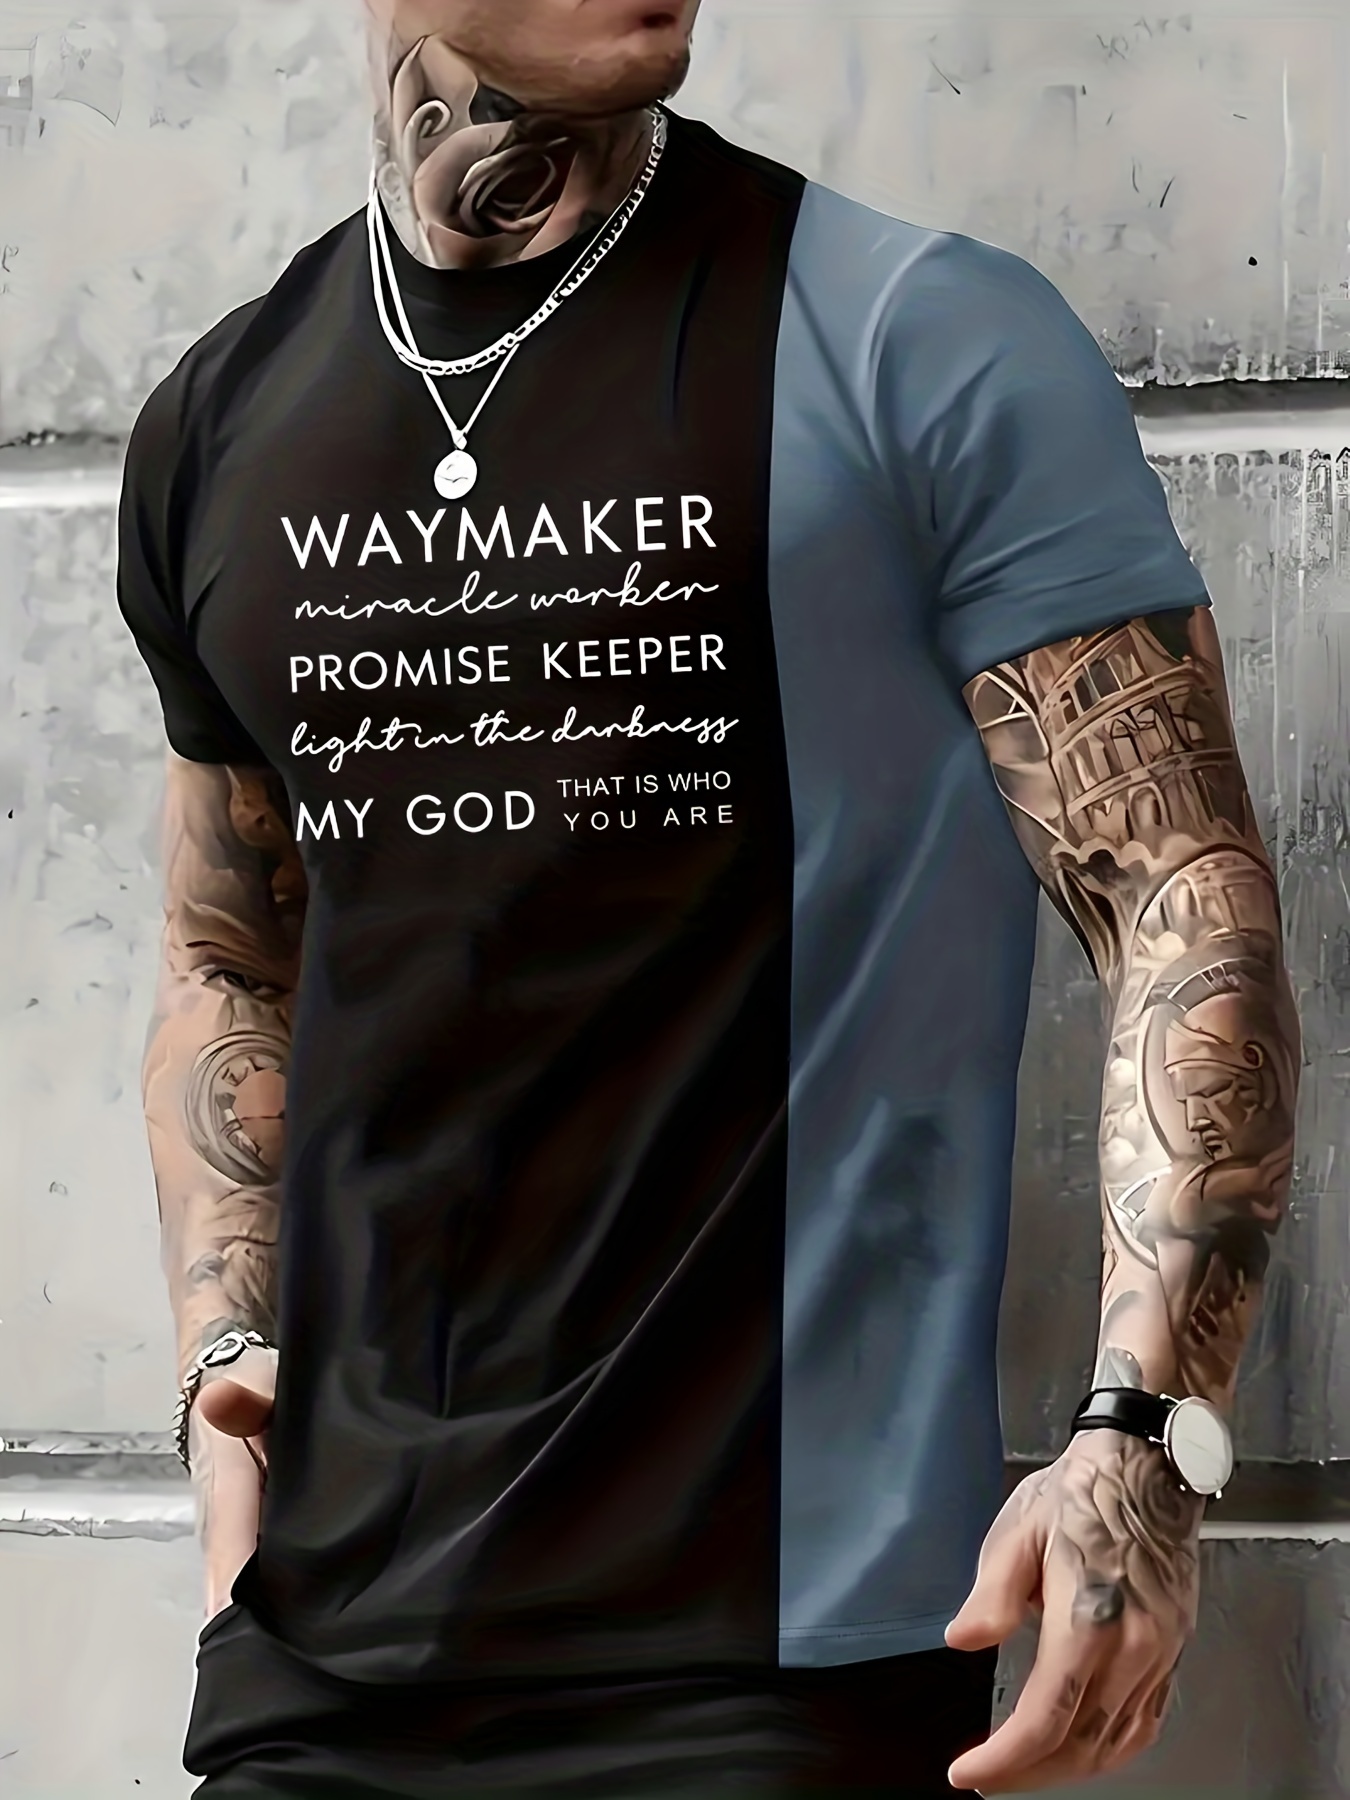 Way Maker Miracle worker promise keeper Men's T-Shirt